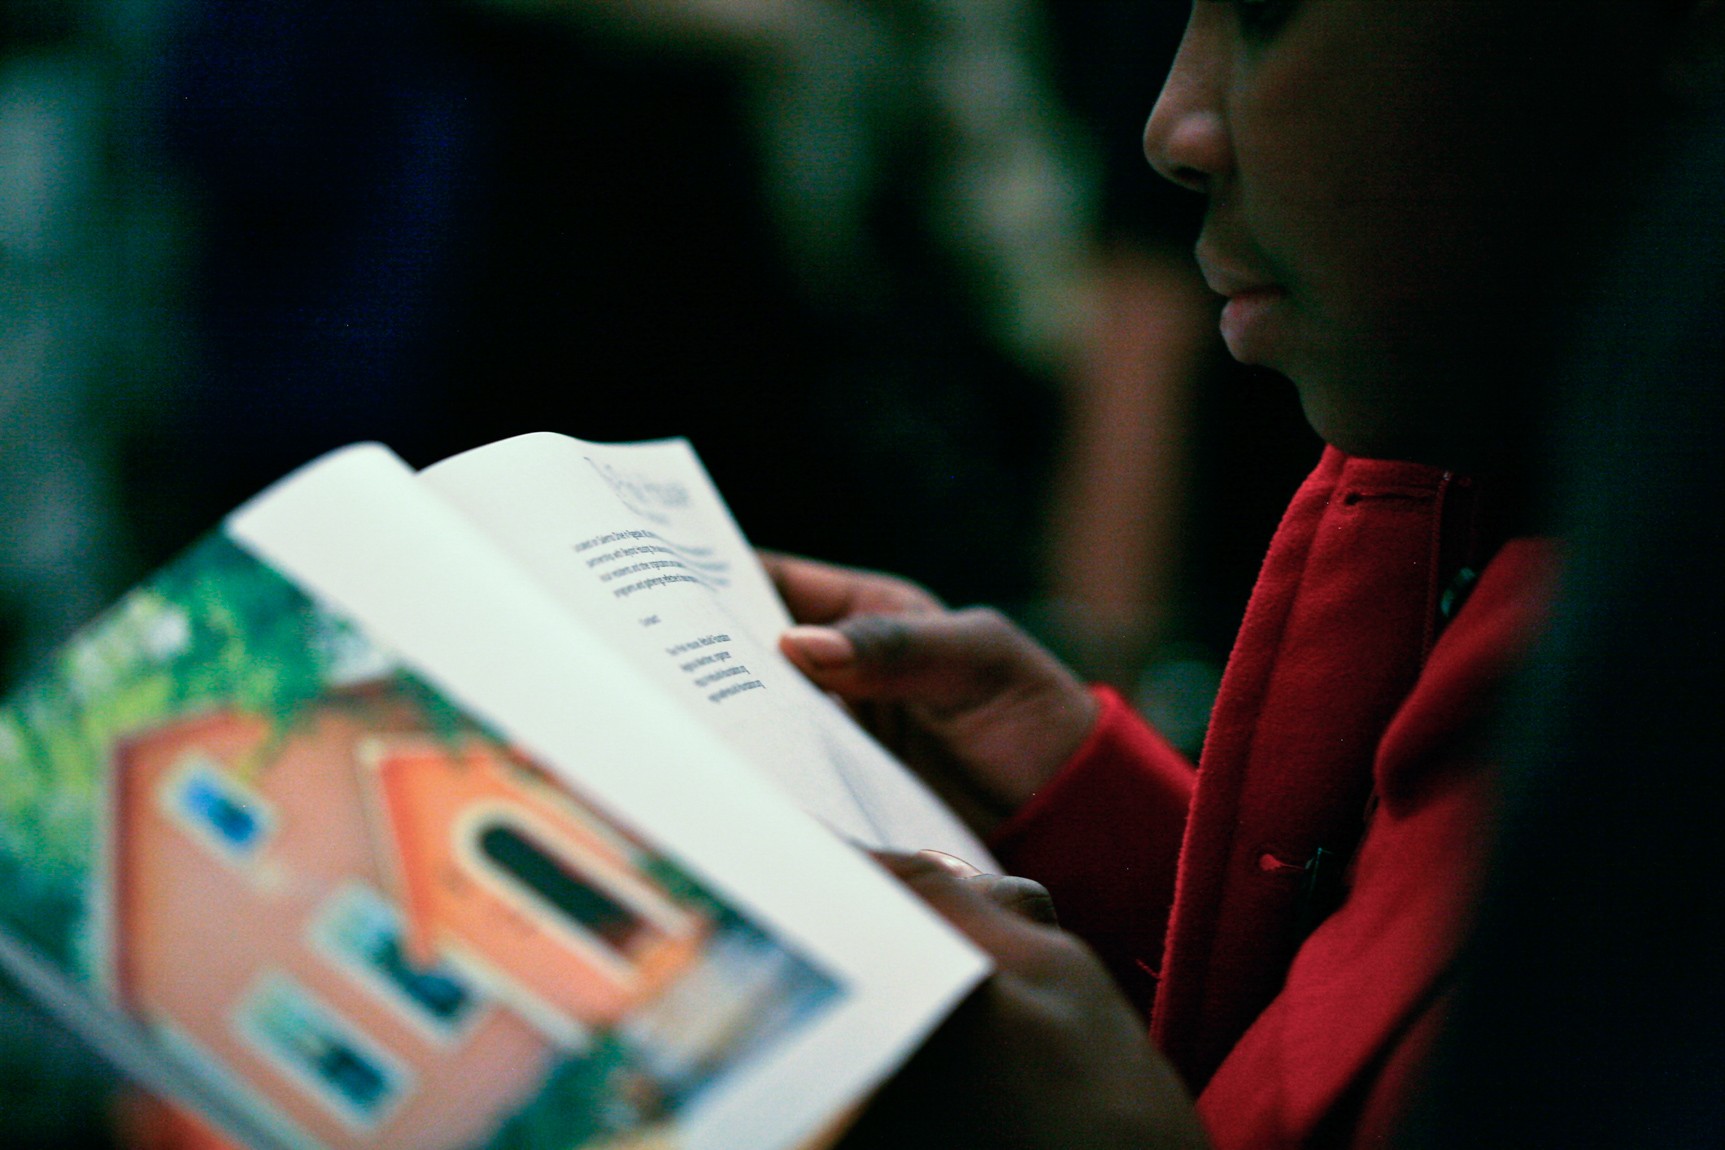 A young visitor reads a page from a guide.